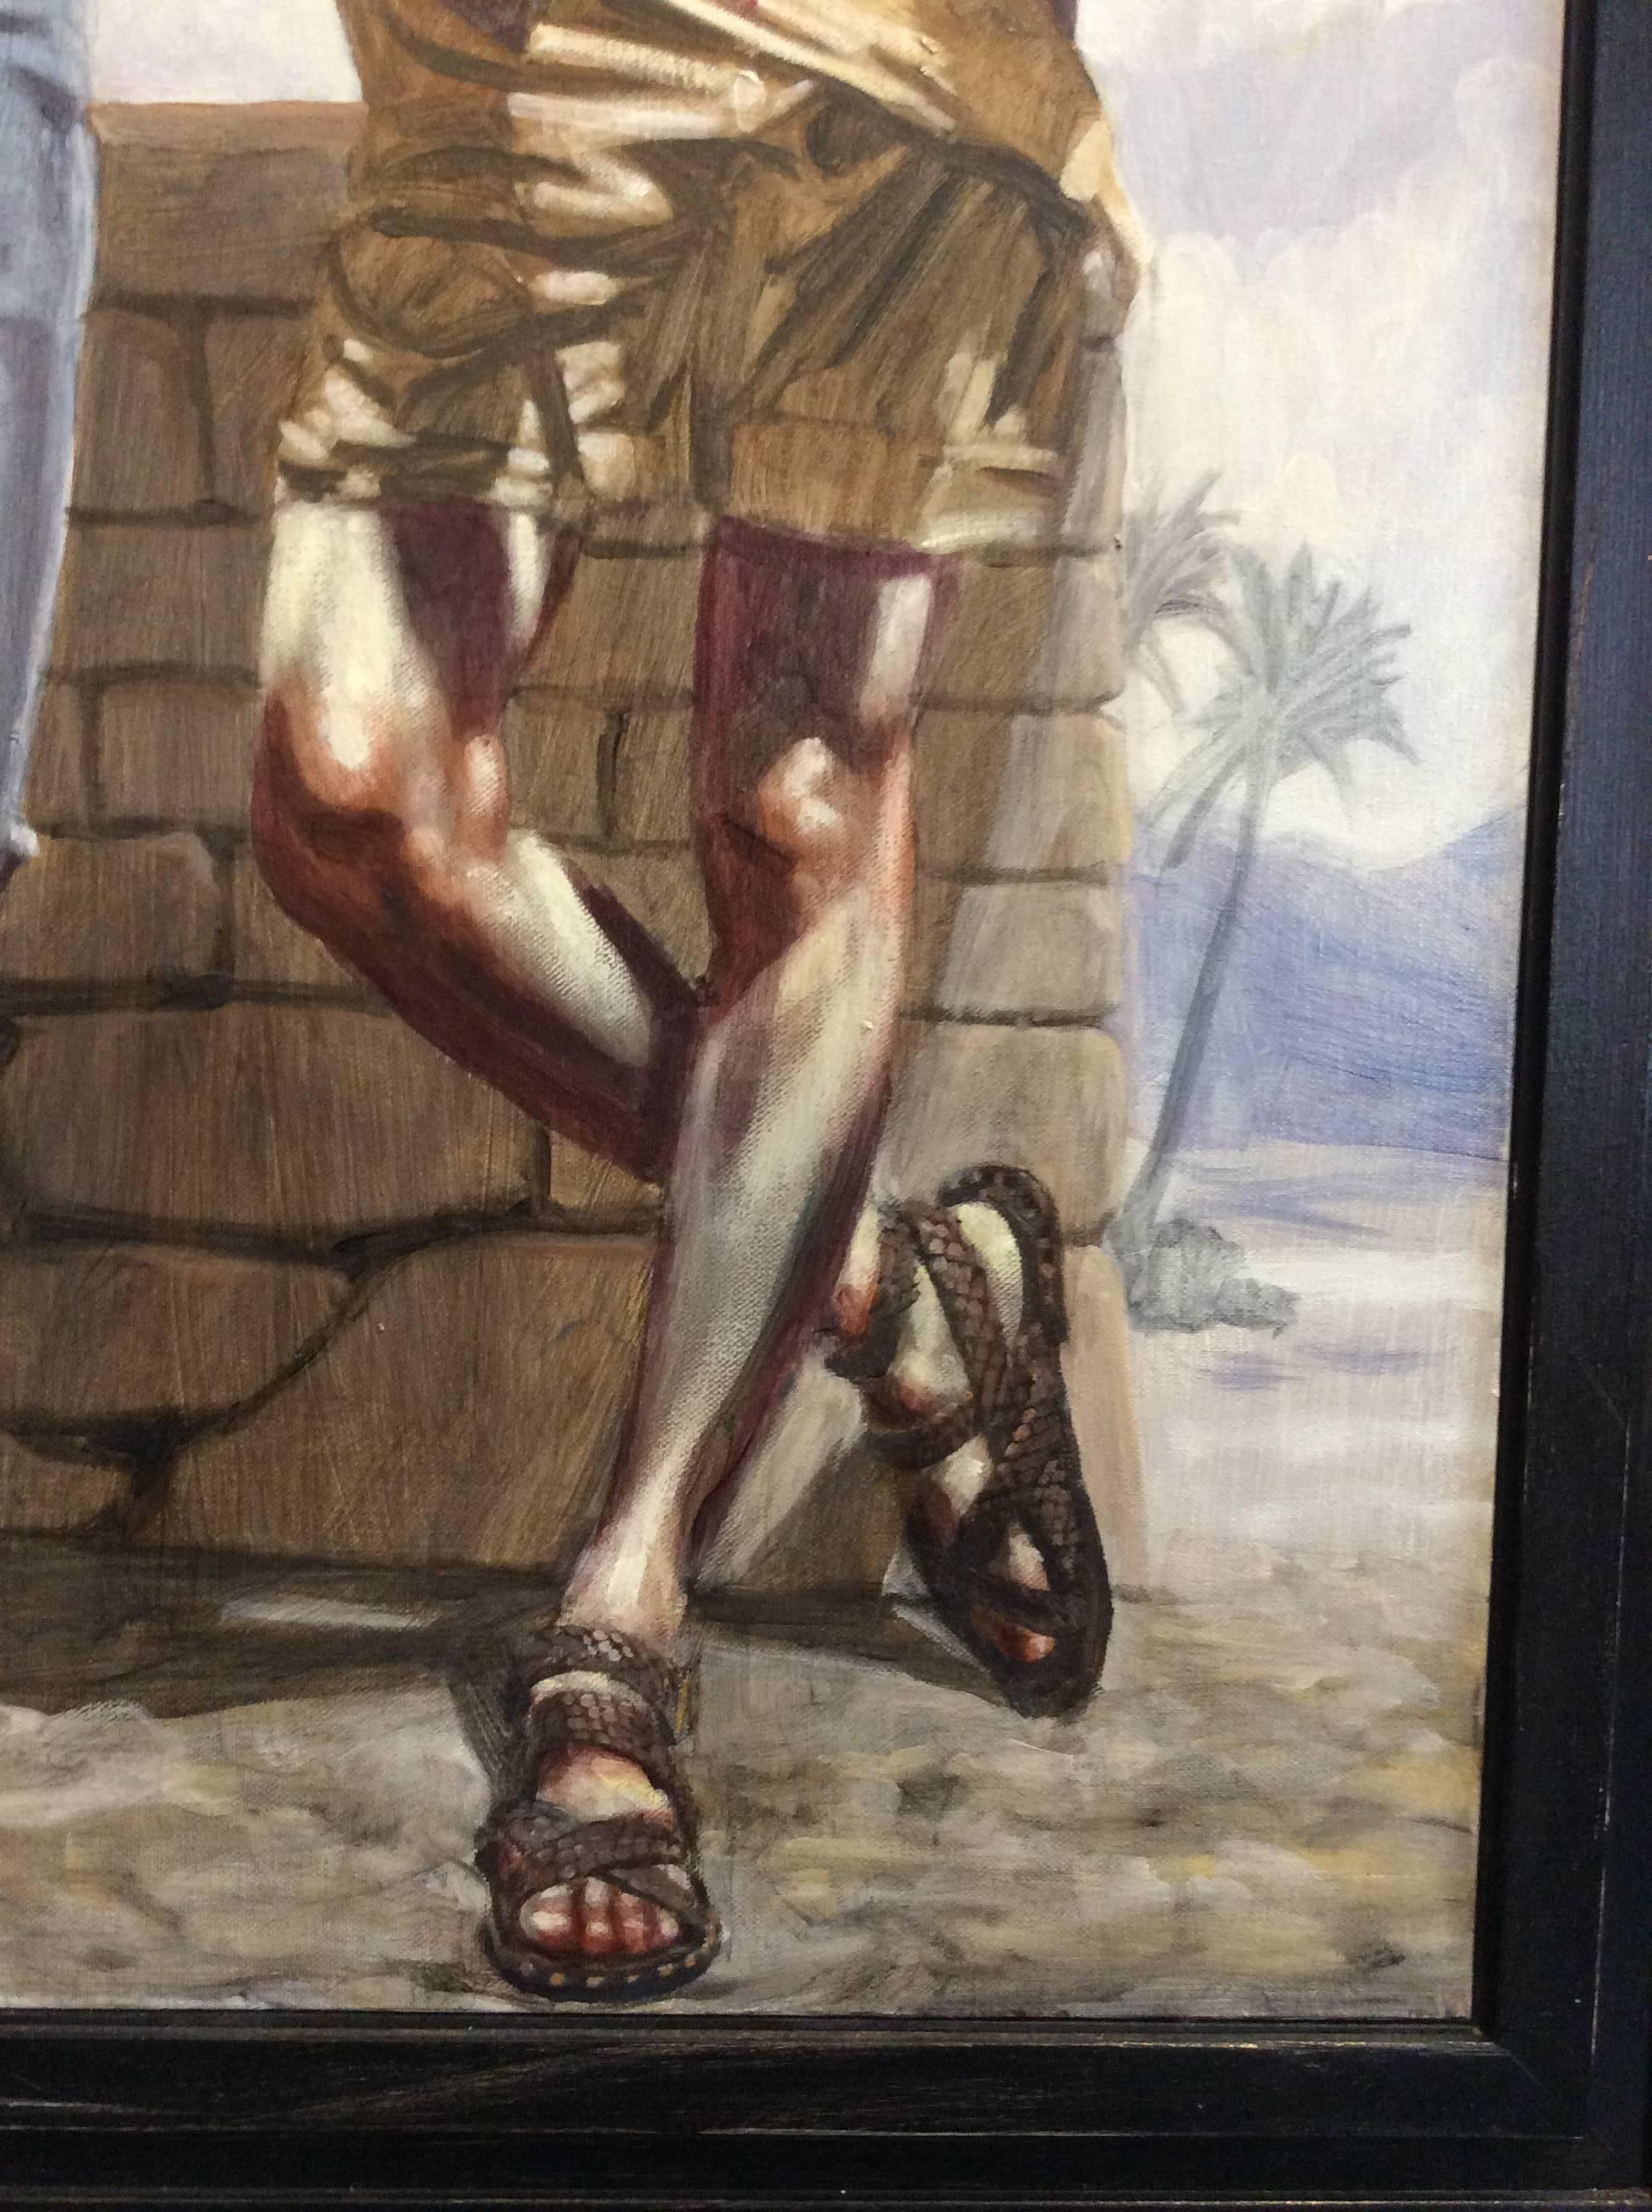 oil on canvas
37 x 25 inches unframed
44 x 32 x 3 inches in black painted distressed wood frame
This listing is available from Carrie Haddad Gallery, based in Hudson, NY.

This vertical, contemporary figurative painting of two men wearing sandals